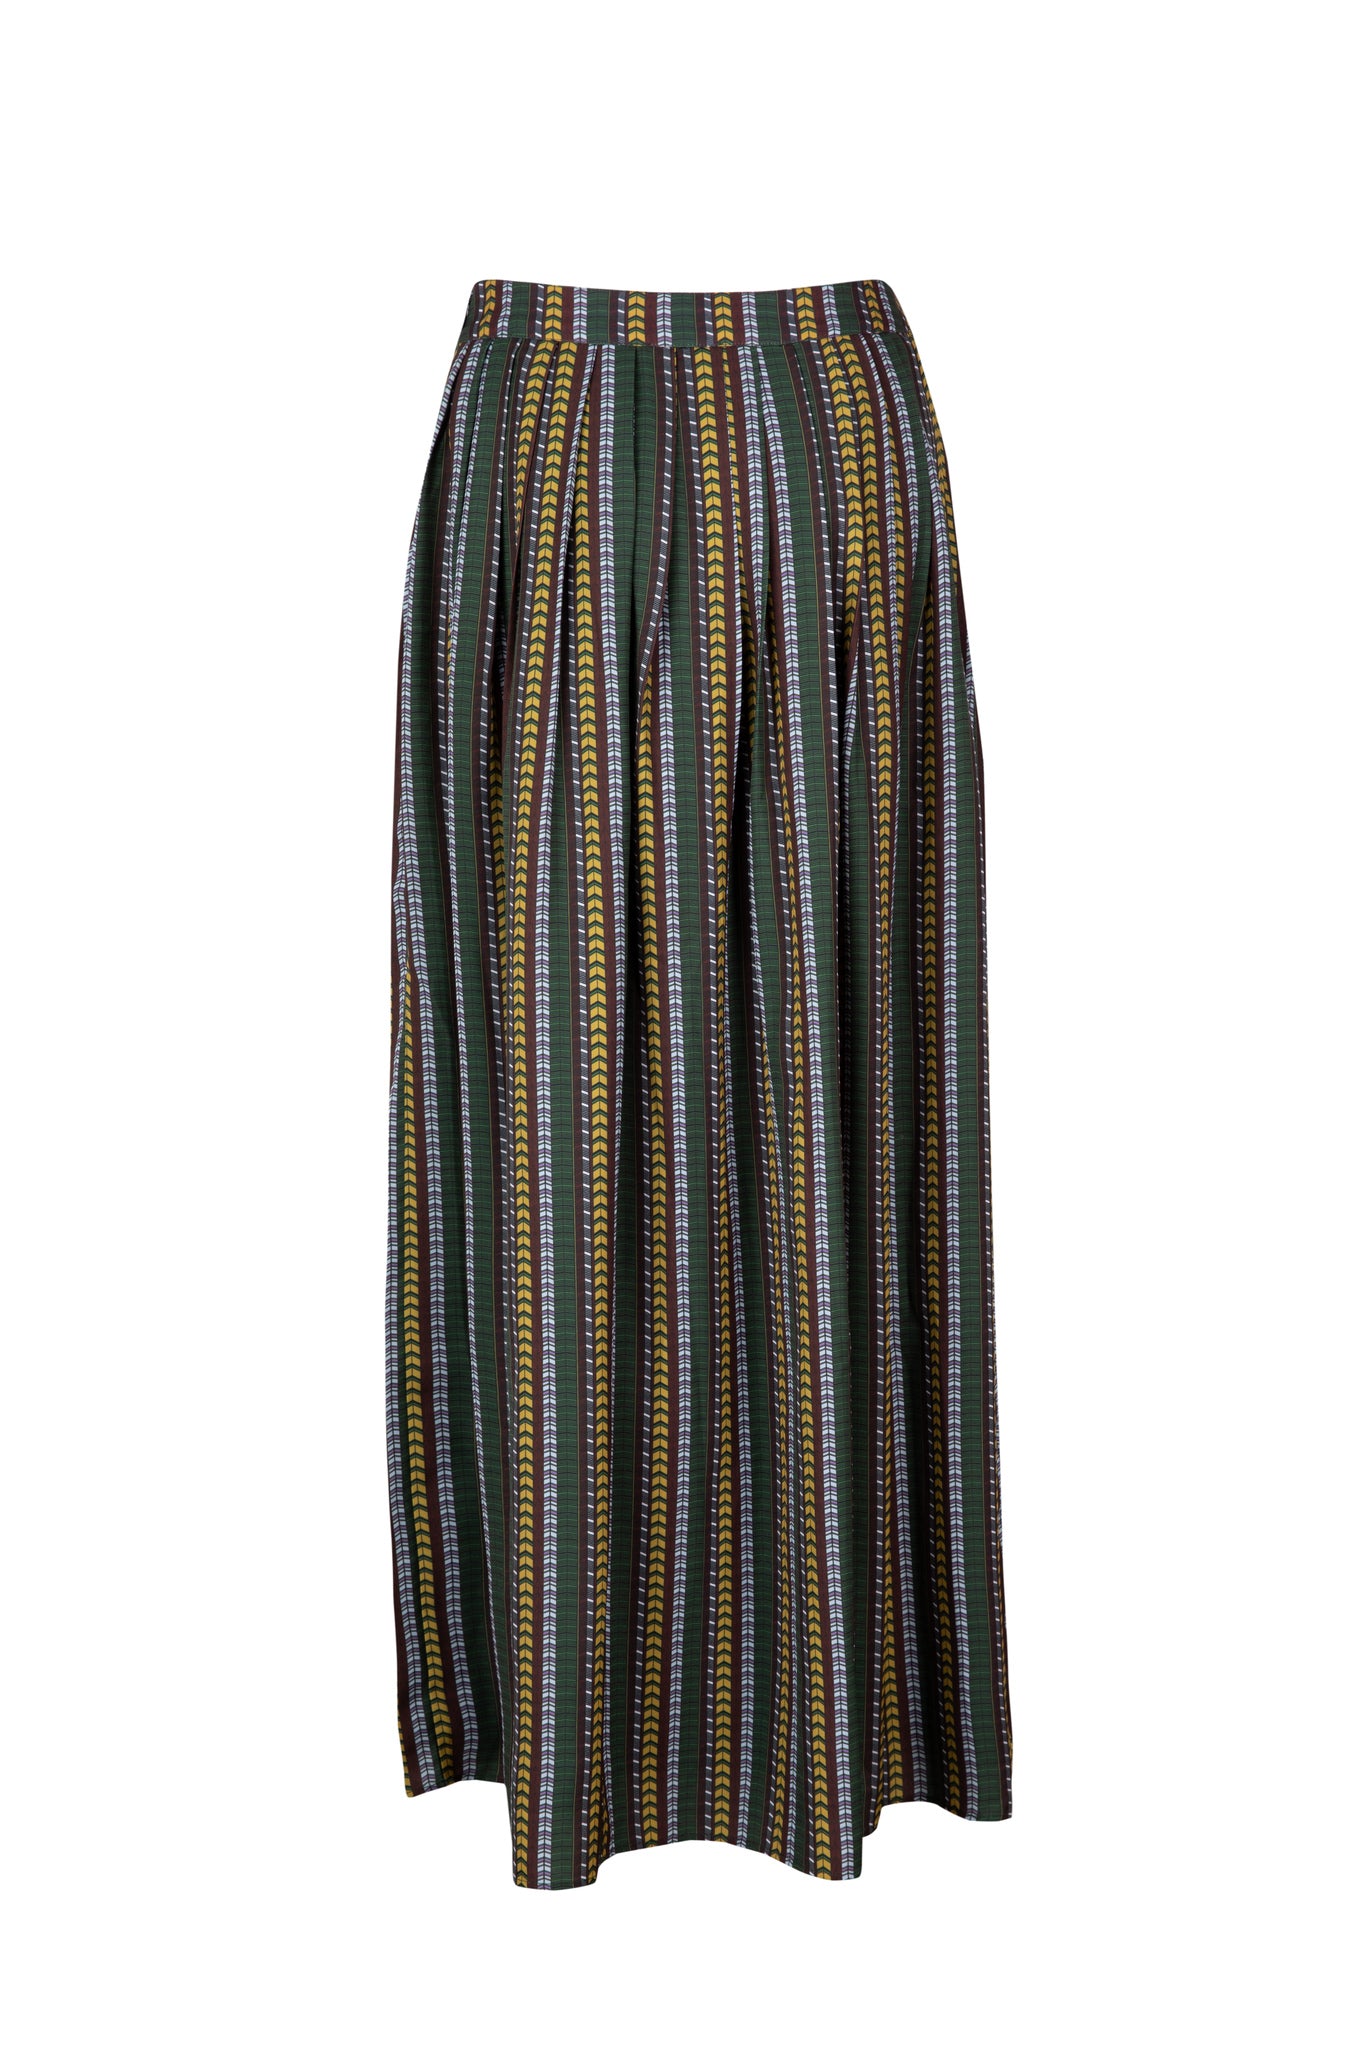 Back view of pleated printed maxi skirt